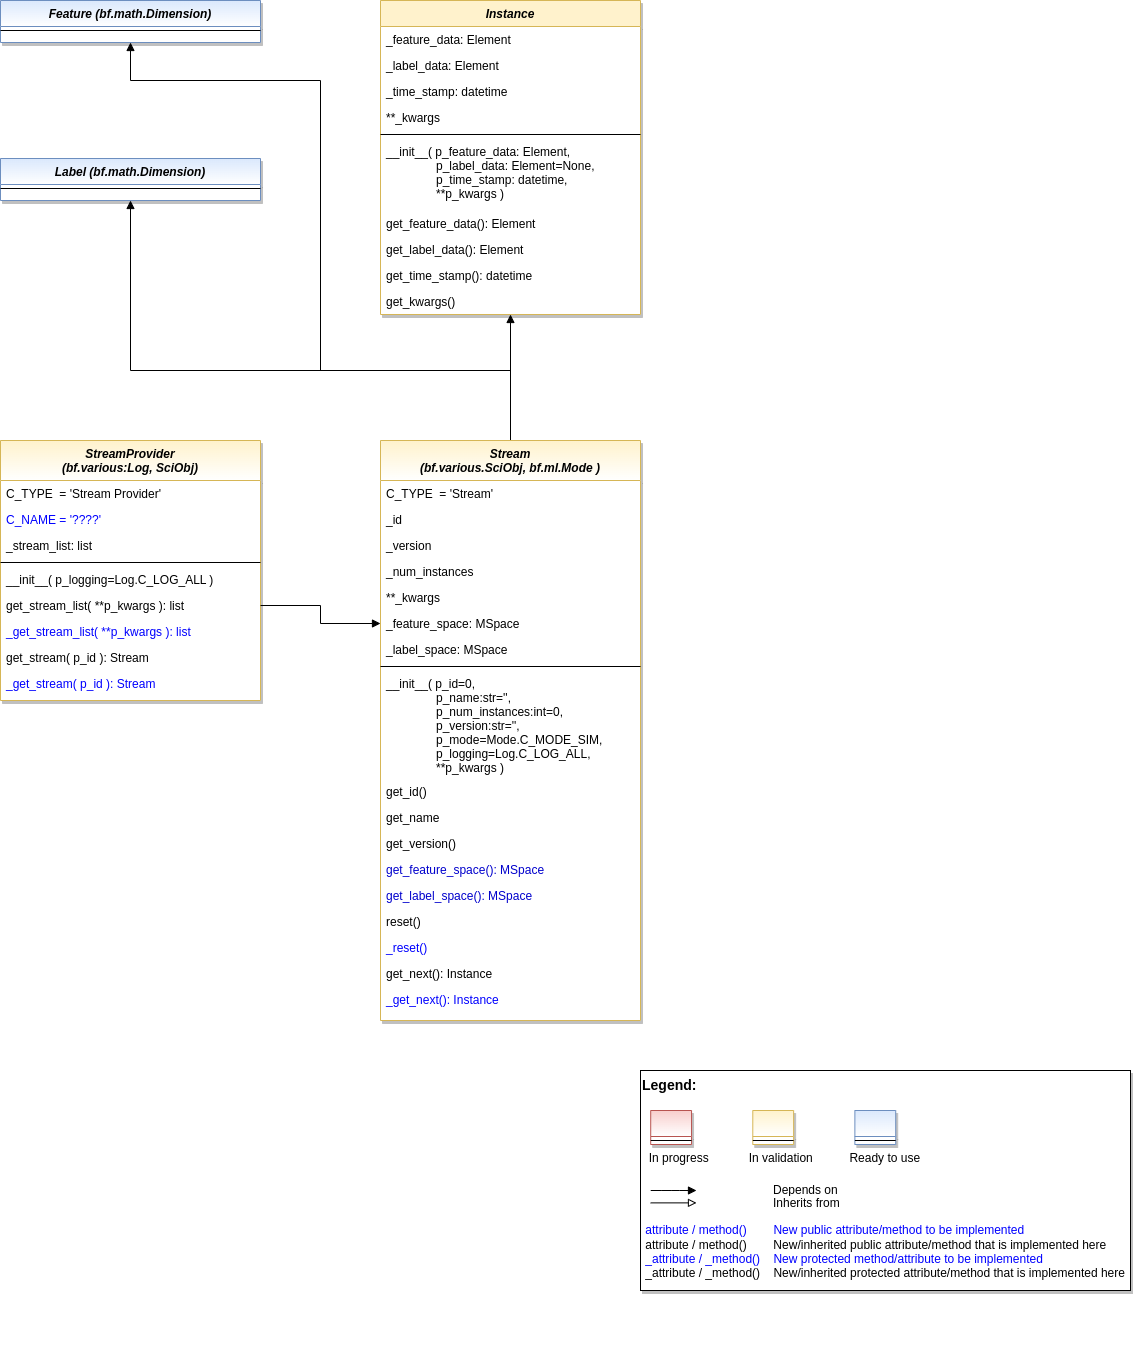 ../../../_images/MLPro-BF-Streams_class_diagram.drawio.png